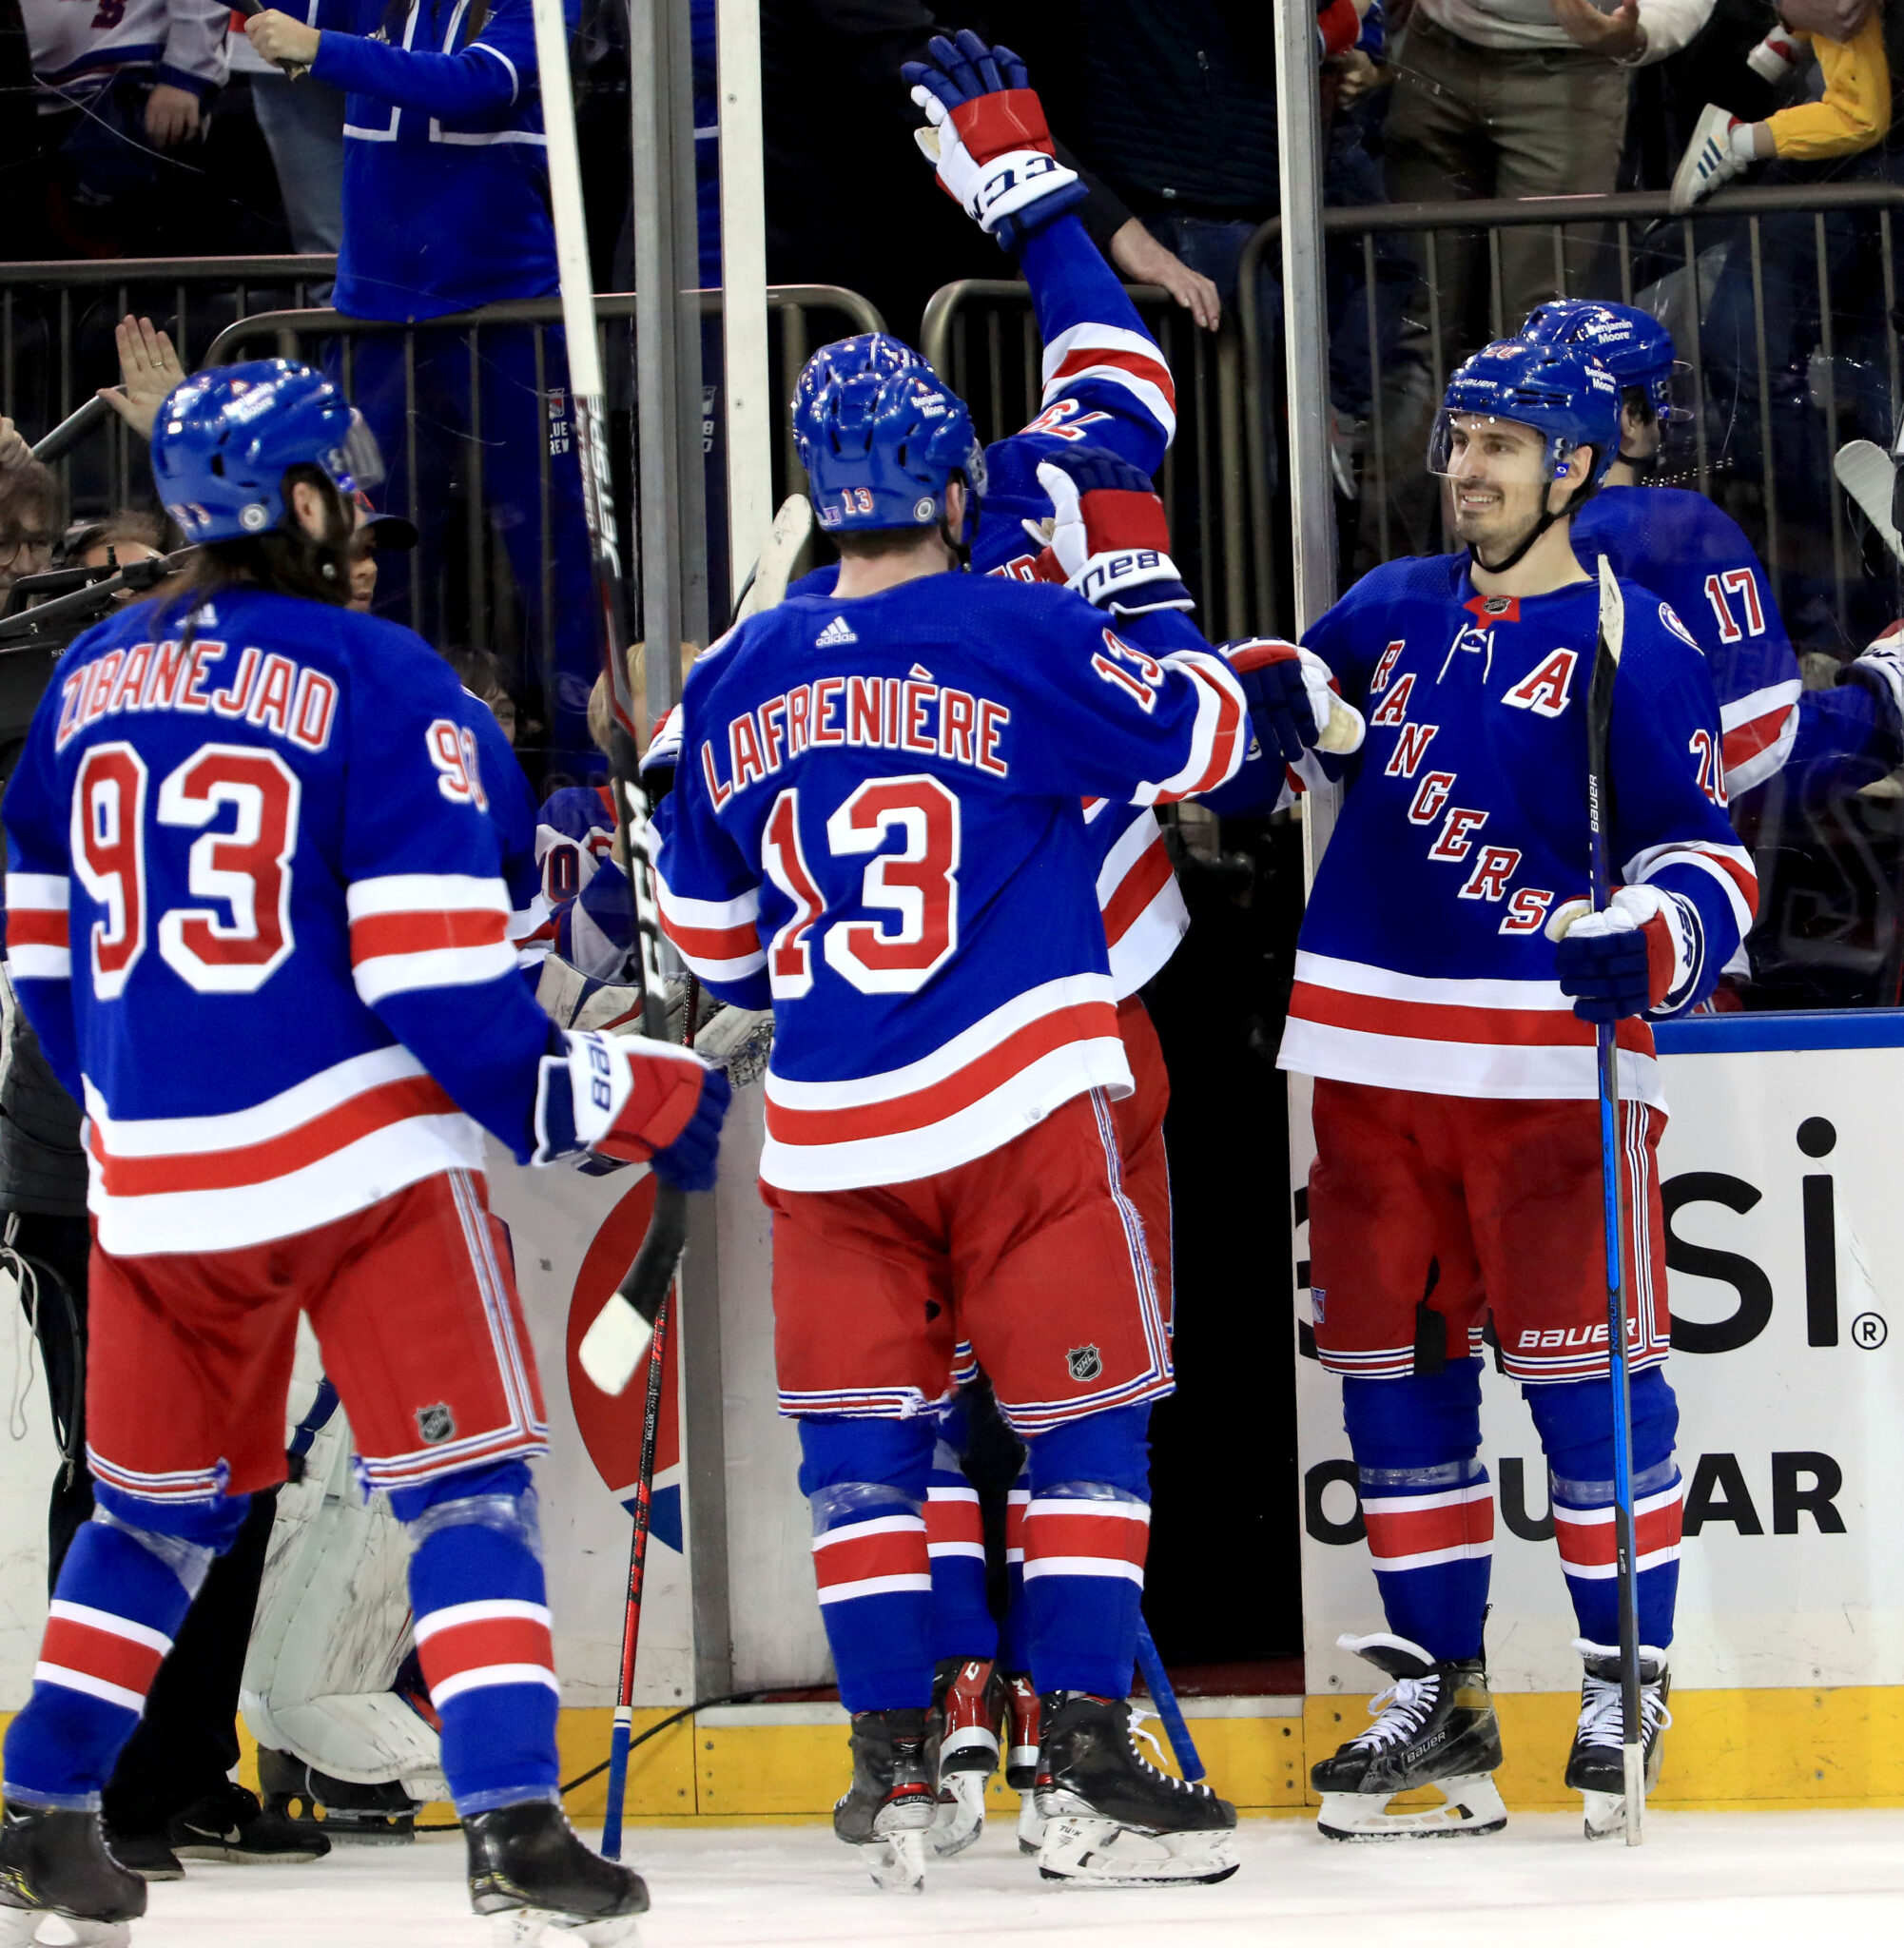 New York Rangers playoff picture shows uphill battle for first place